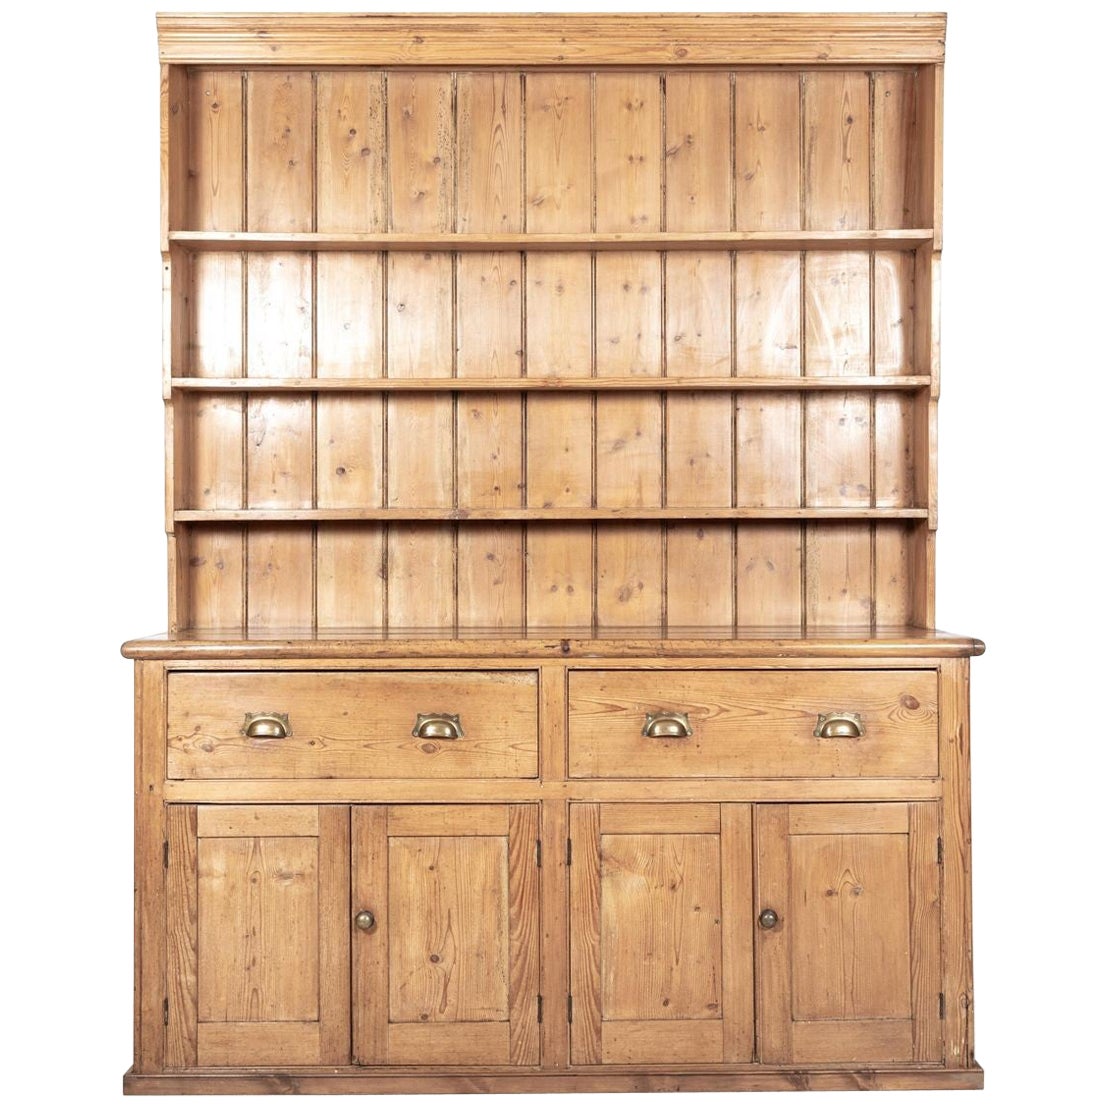 Large 19th C English Pine Waterfall Dresser For Sale